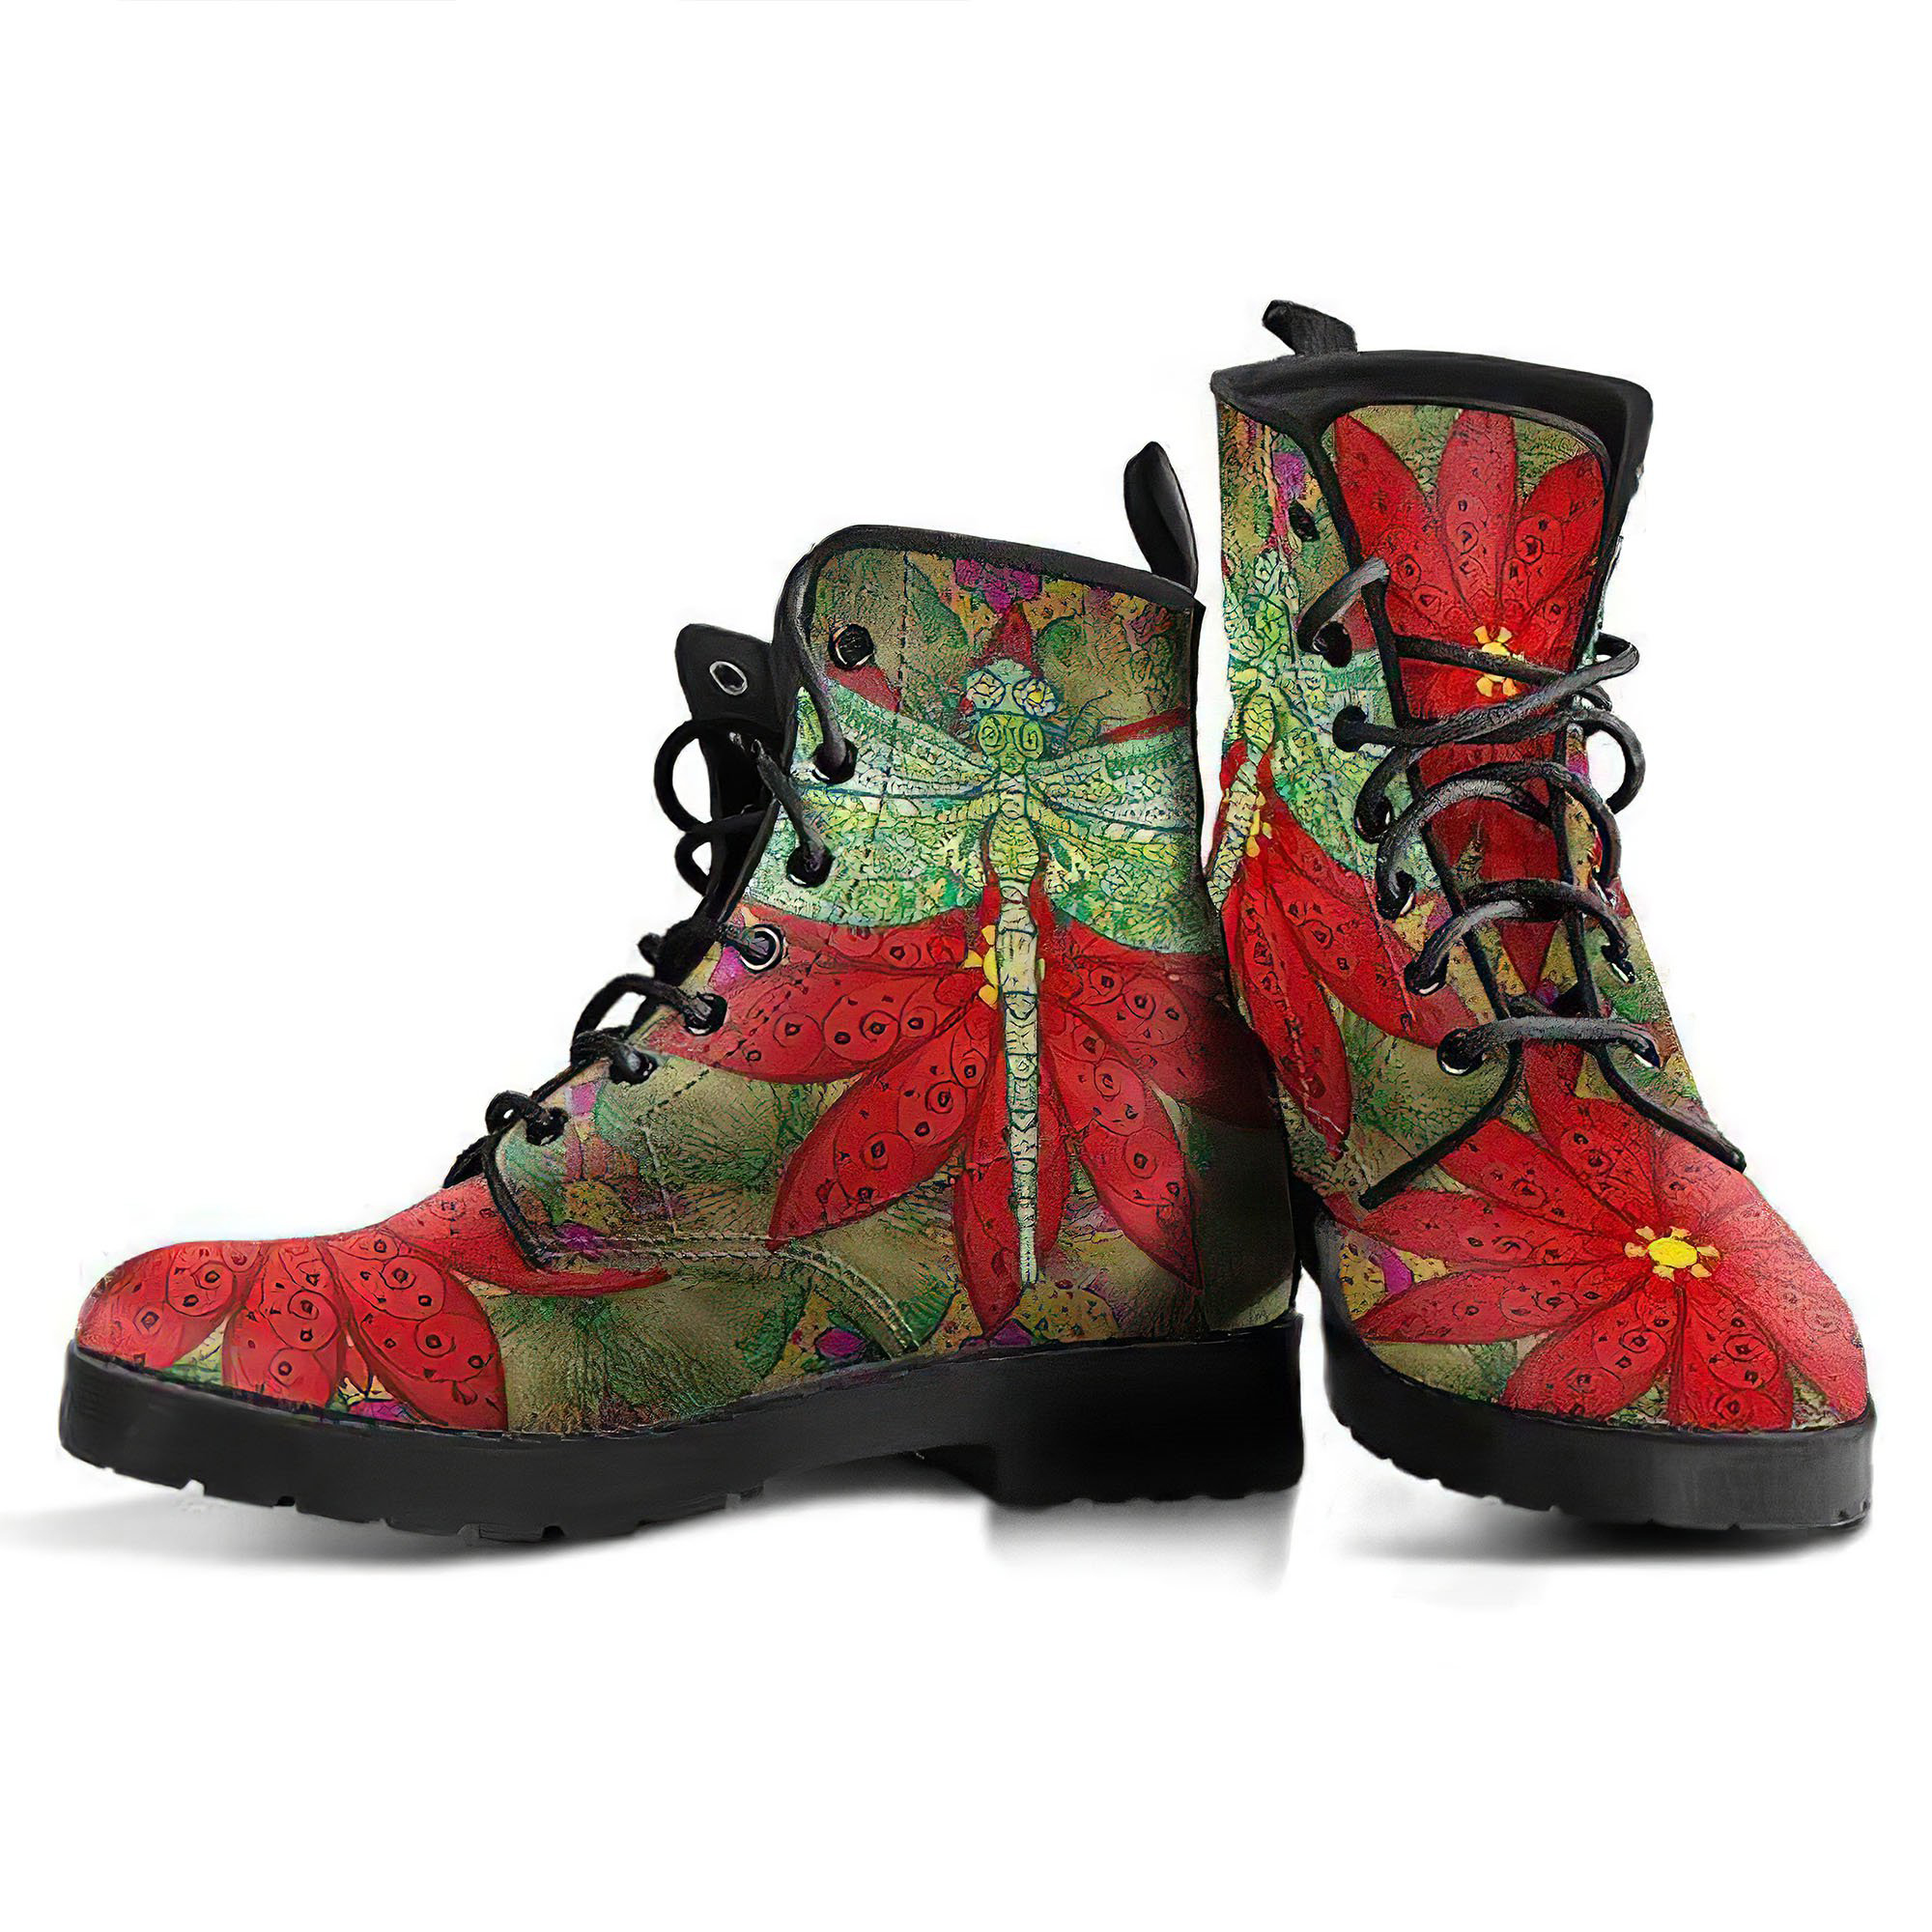 dragonfly-henna-womens-leather-boots-gp-main.jpg